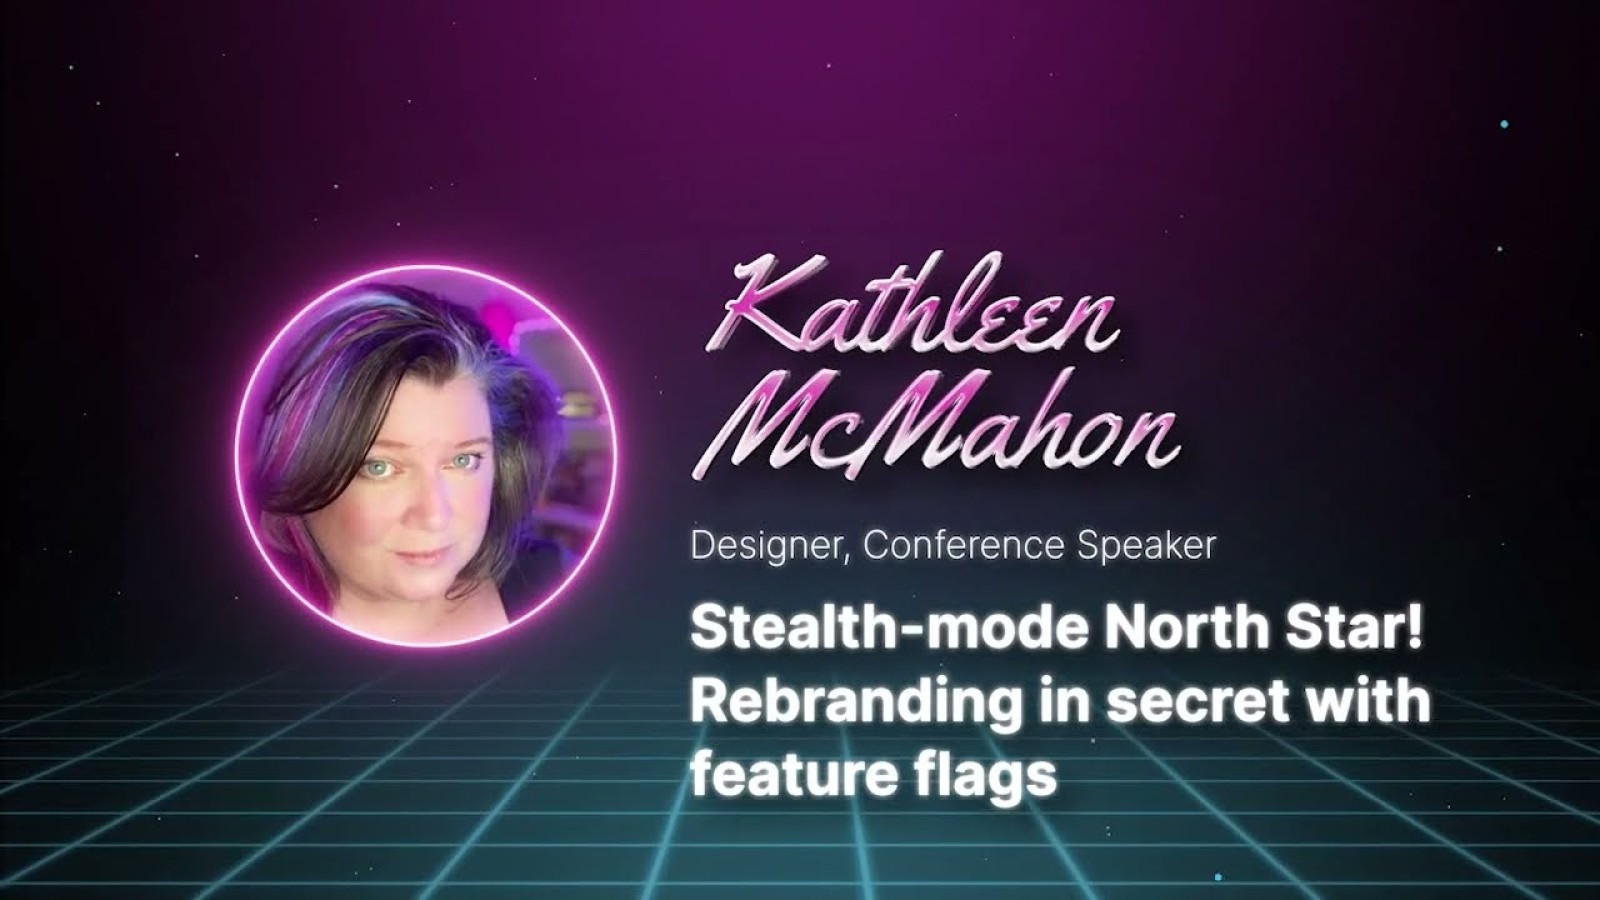 Stealth-mode North Star: Rebranding in secret with feature flags